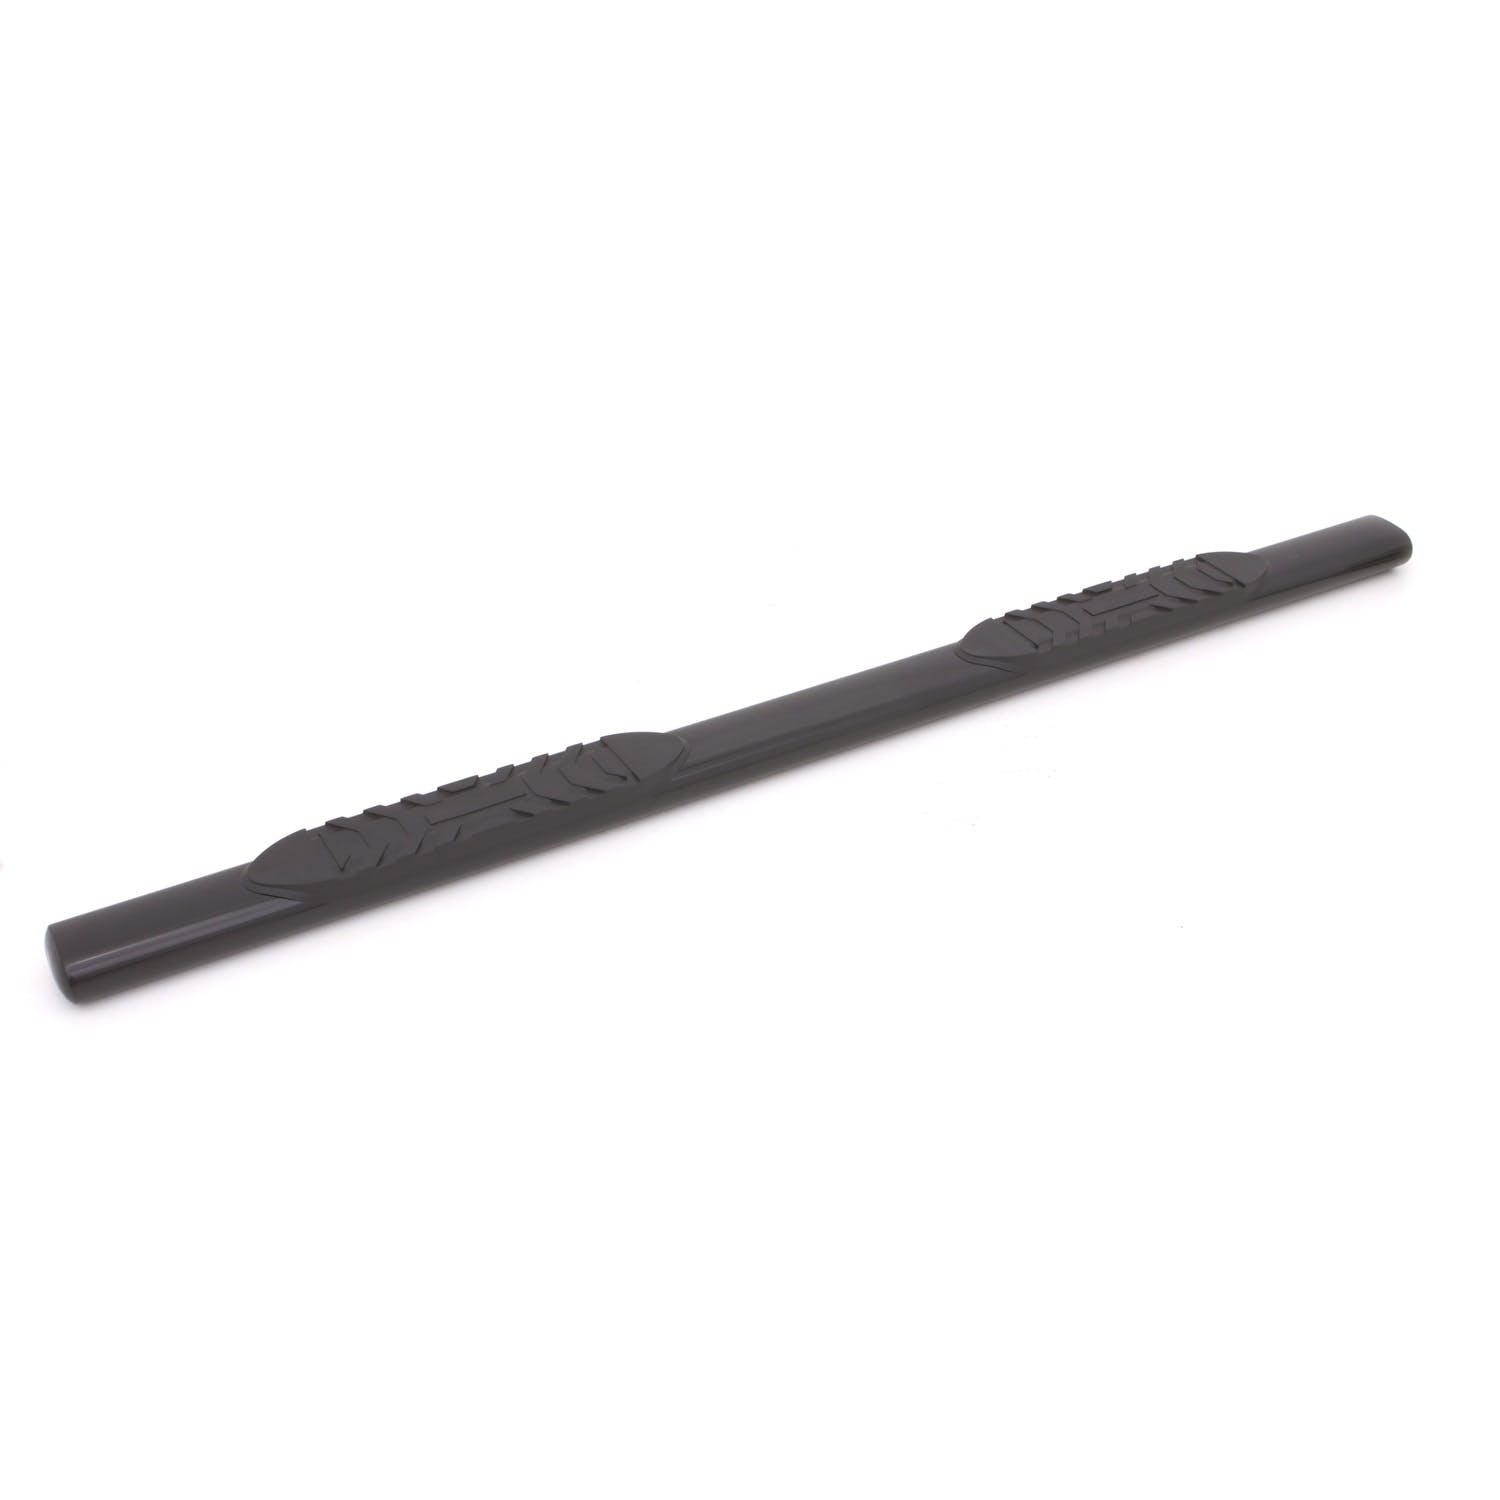 LUND 24082002 5 Inch Oval Straight Nerf Bar - Black 5 In OVAL STRAIGHT STEEL